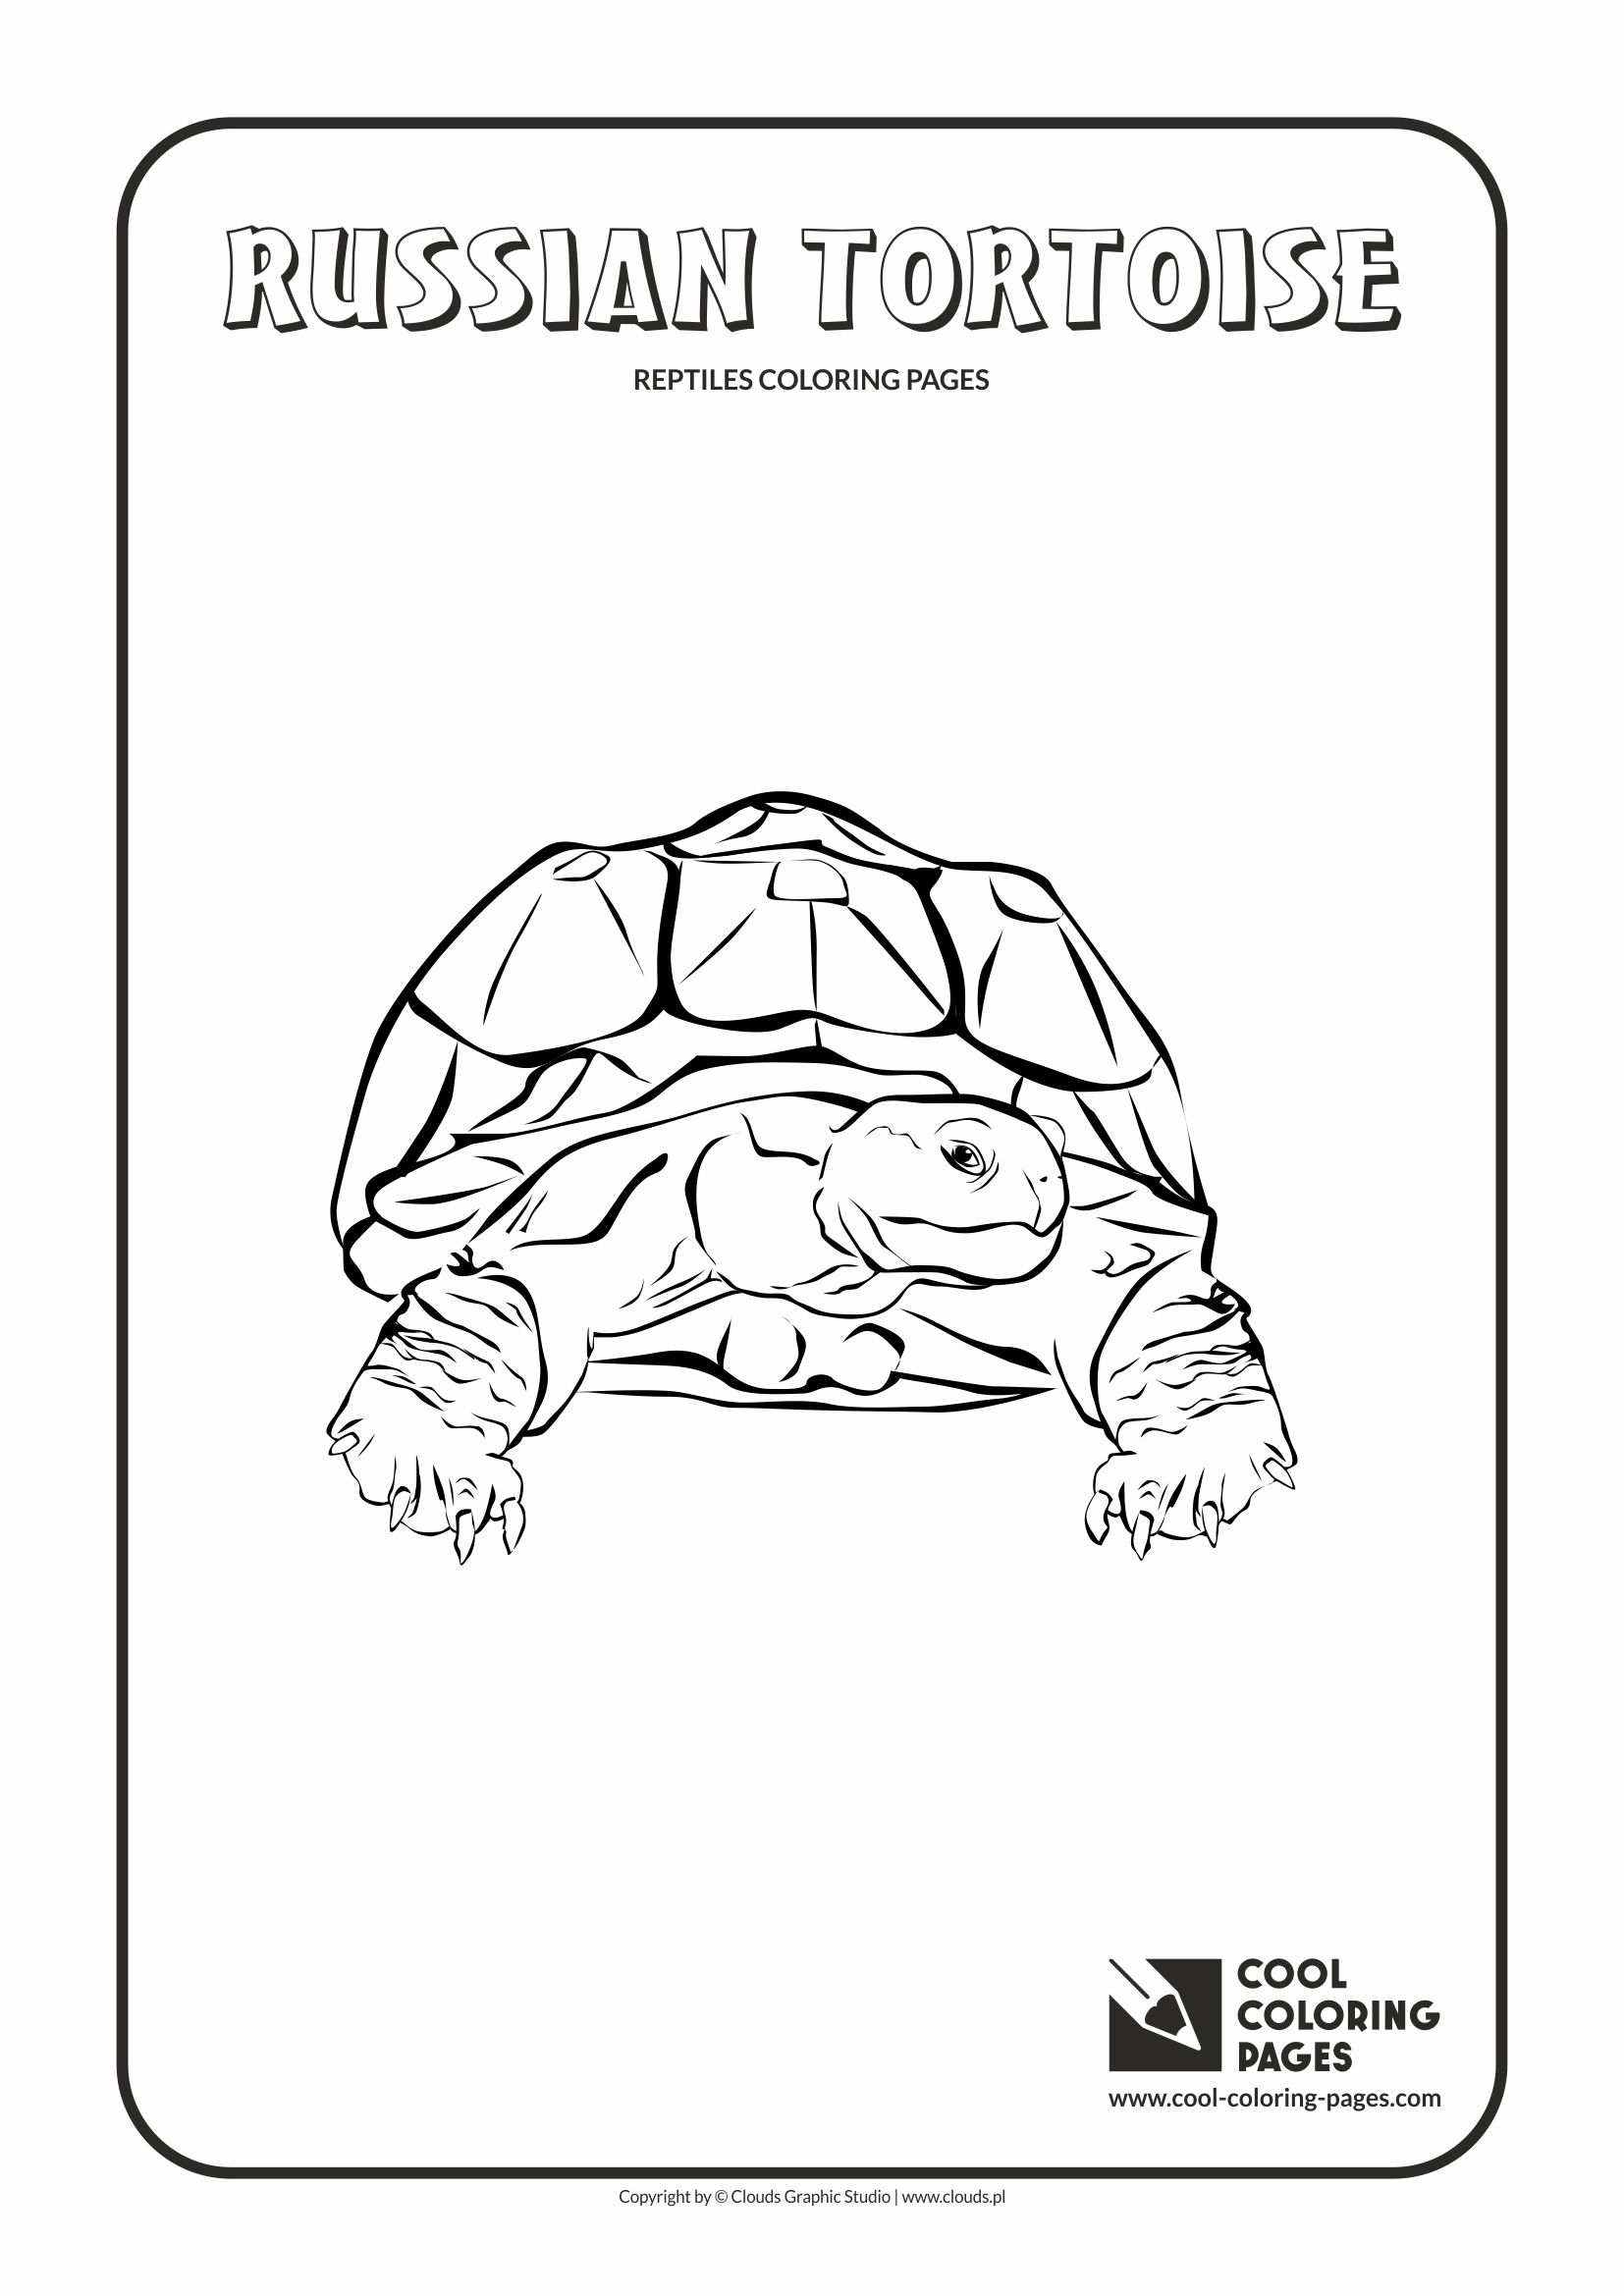 White-lipped Tree Frog coloring #14, Download drawings